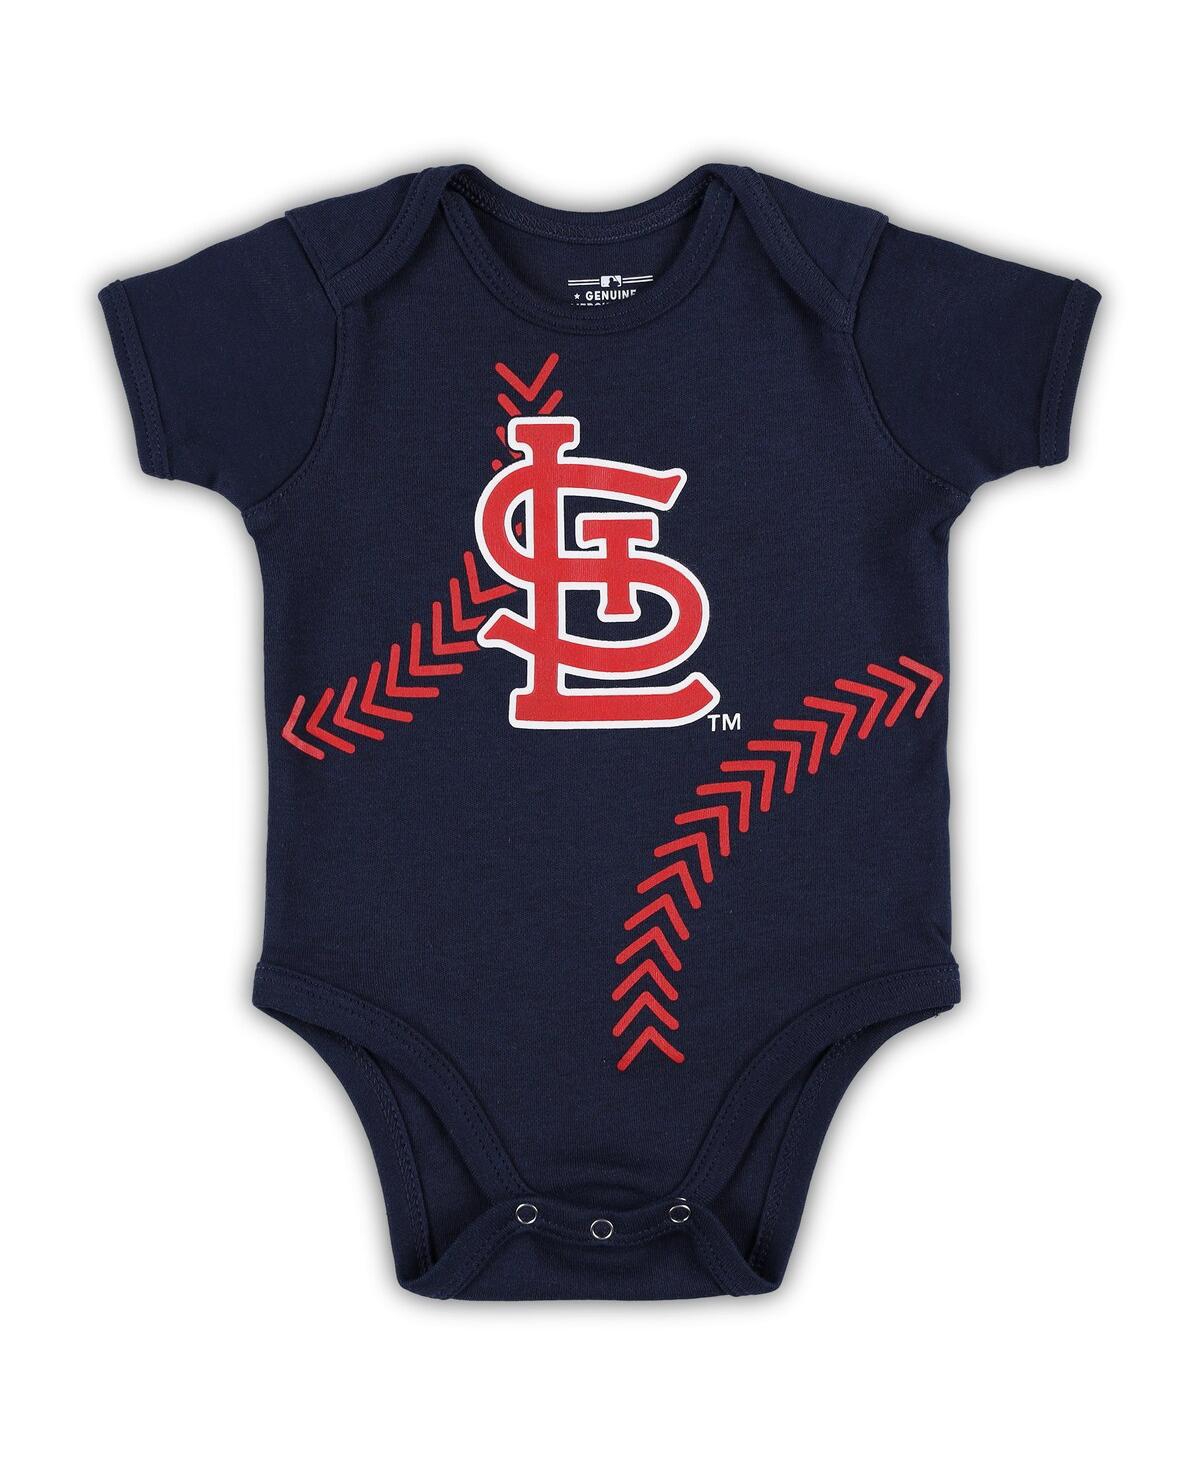 Outerstuff Babies' Newborn And Infant Boys And Girls Navy St. Louis Cardinals Running Home Bodysuit